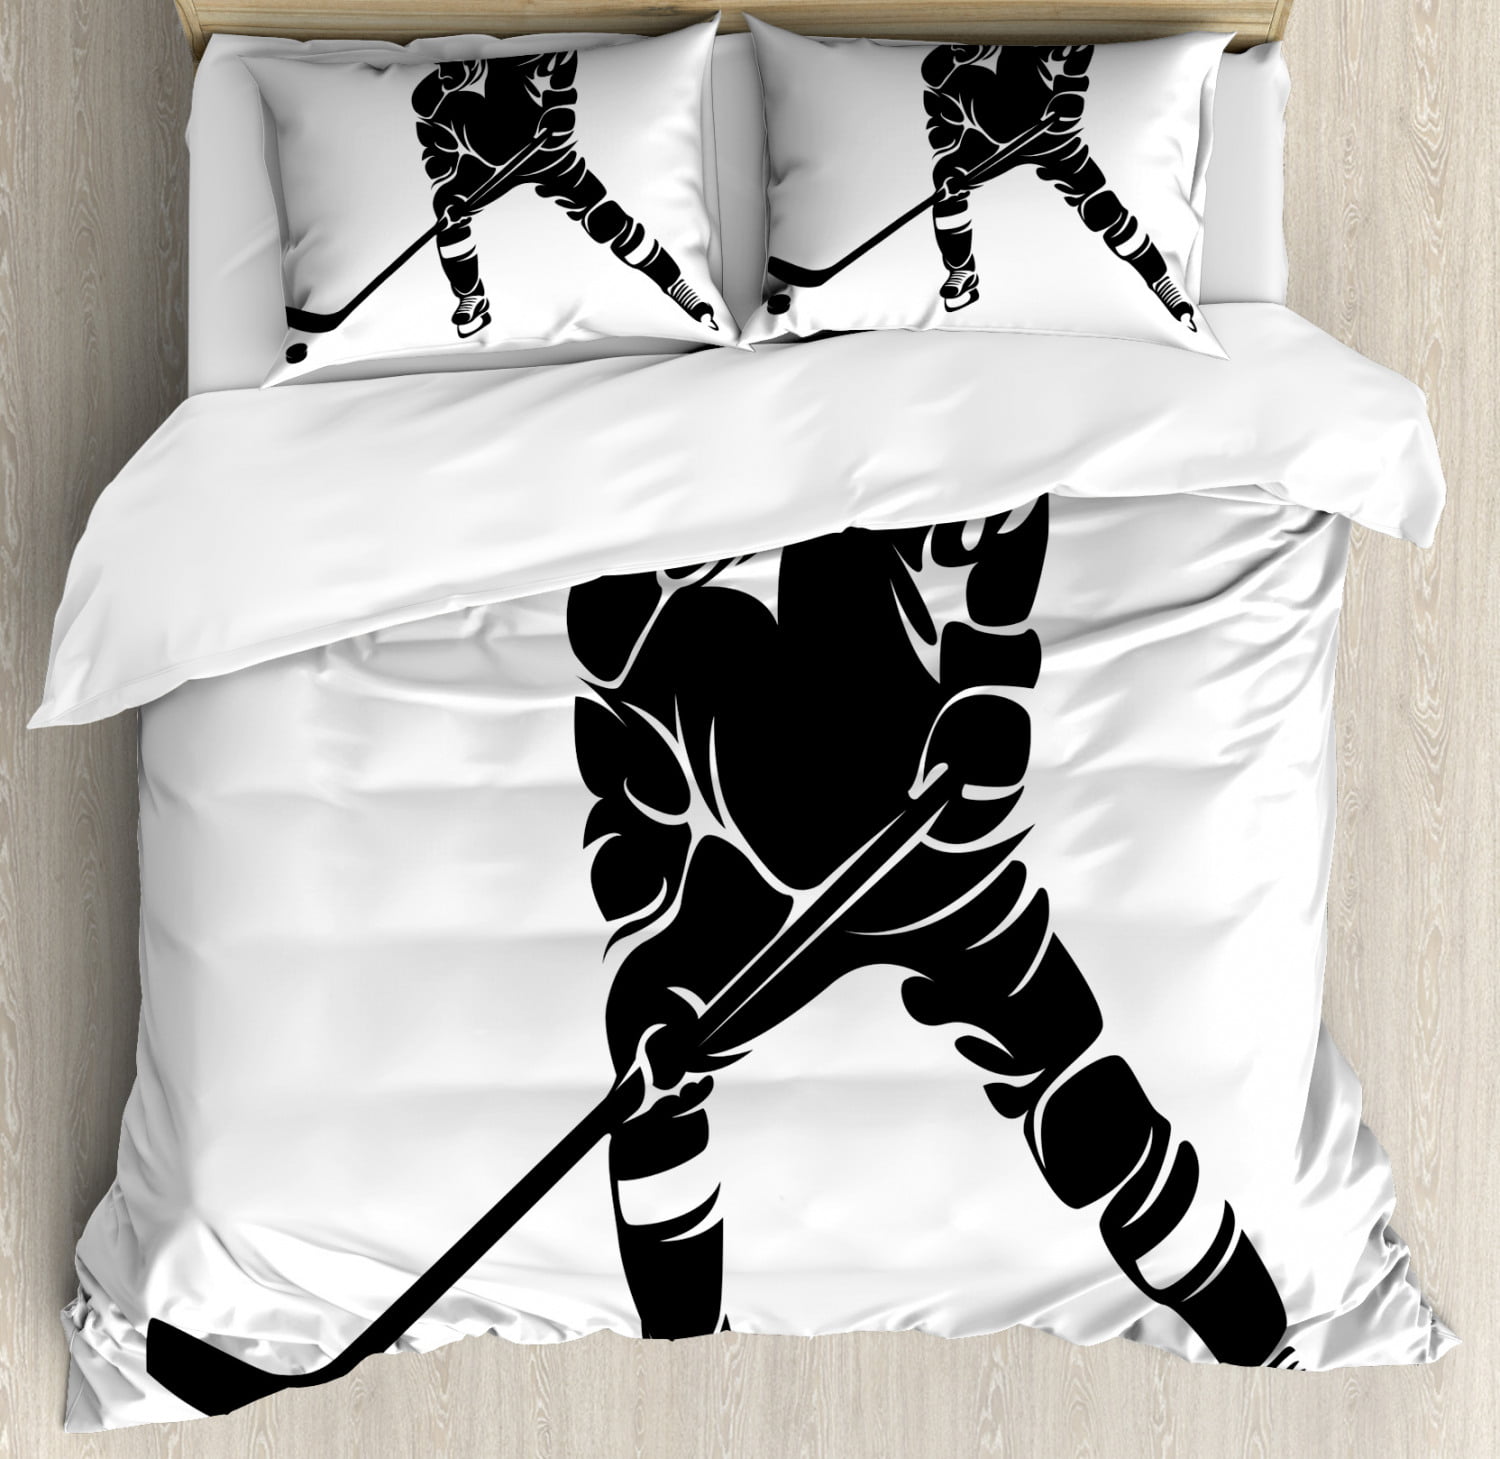 Hockey Duvet Cover Set Abstract Black Silhouette Of A Competitive